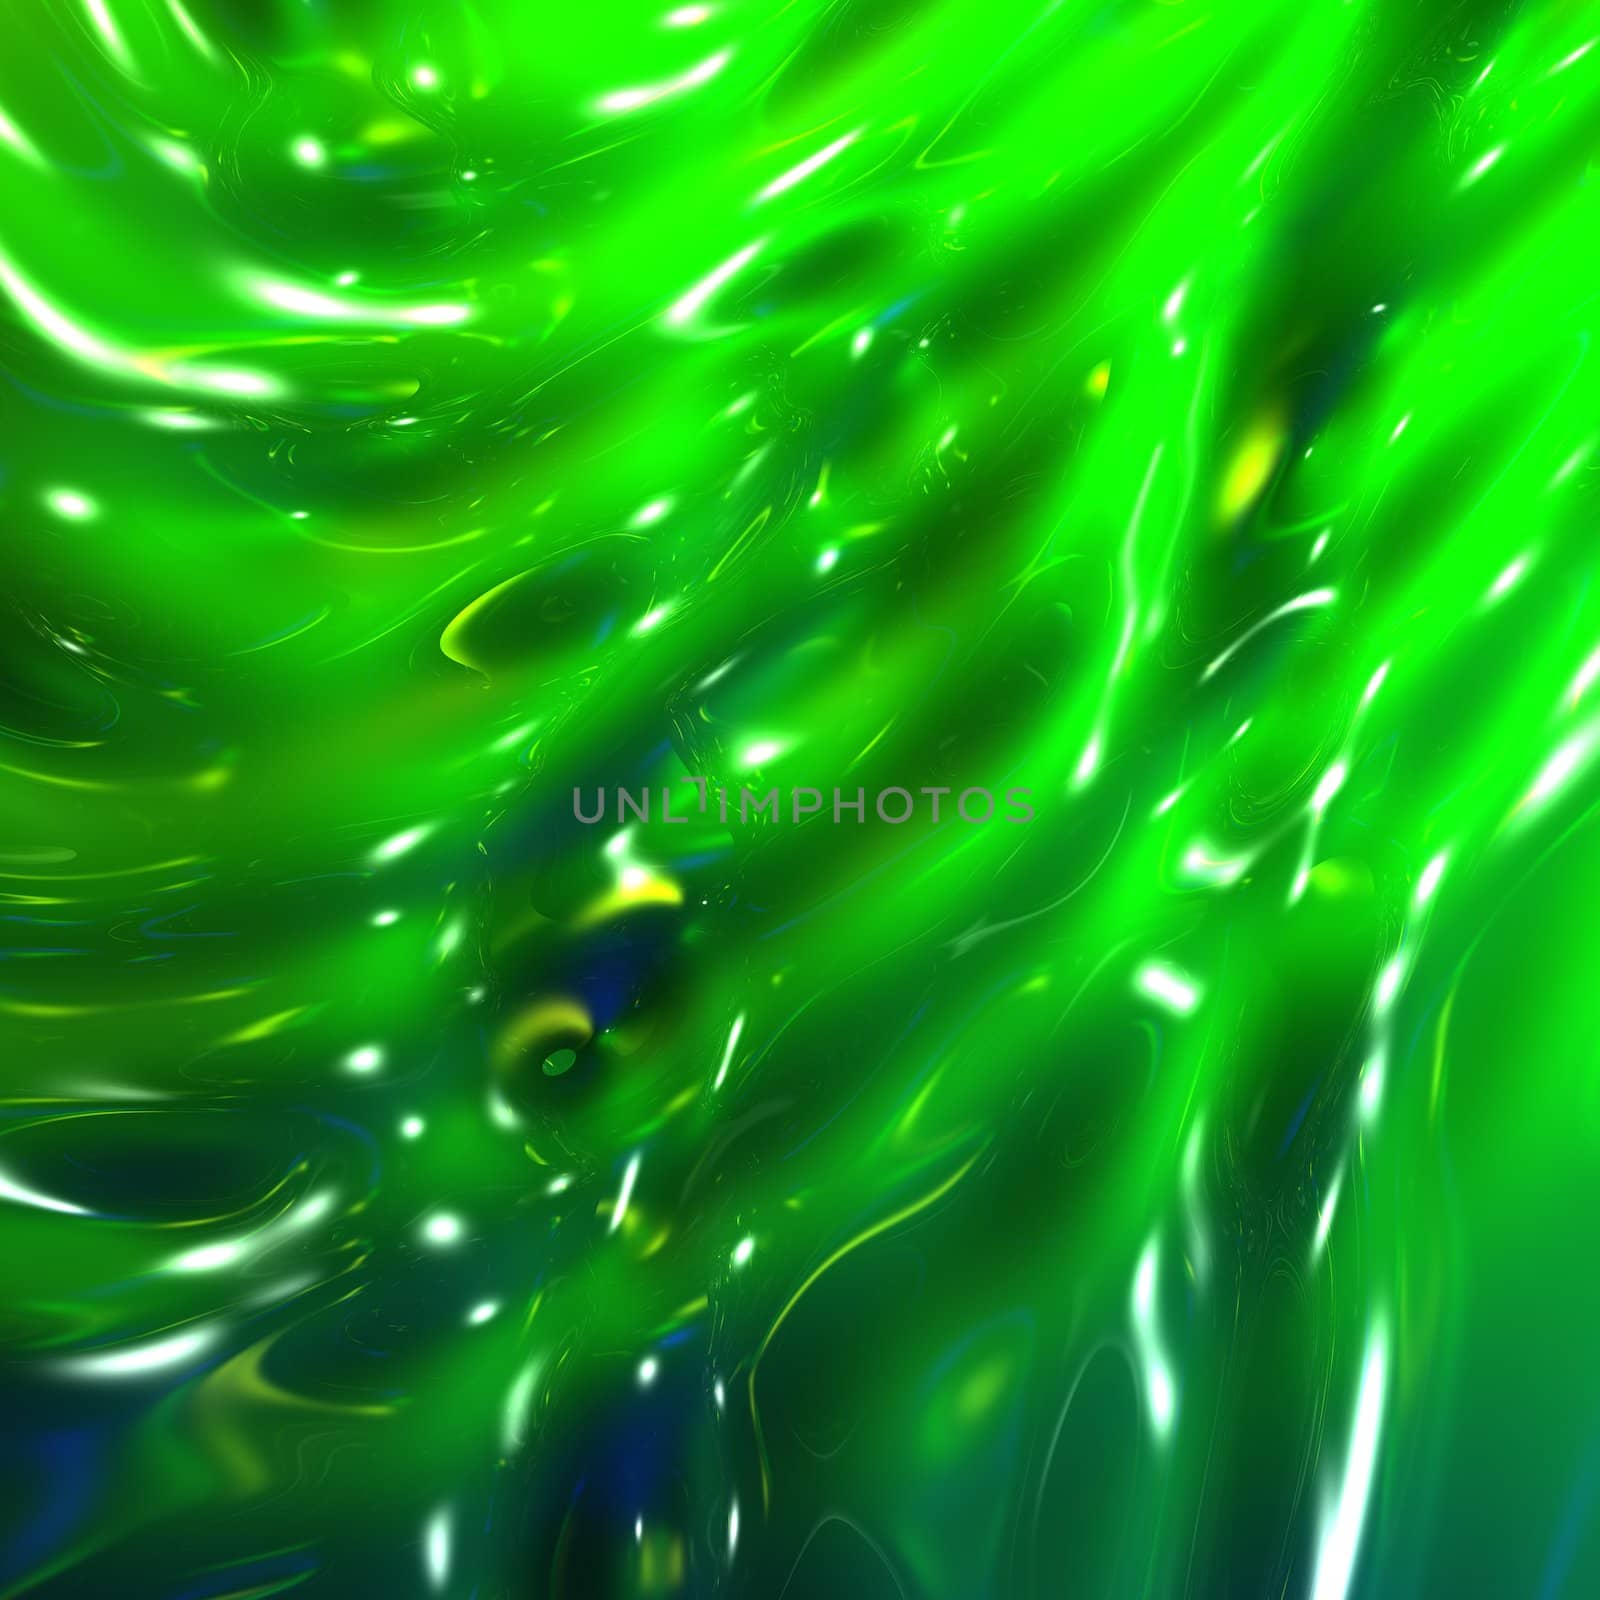 An illustration of a modern abstract background with a green melting plastic appearance